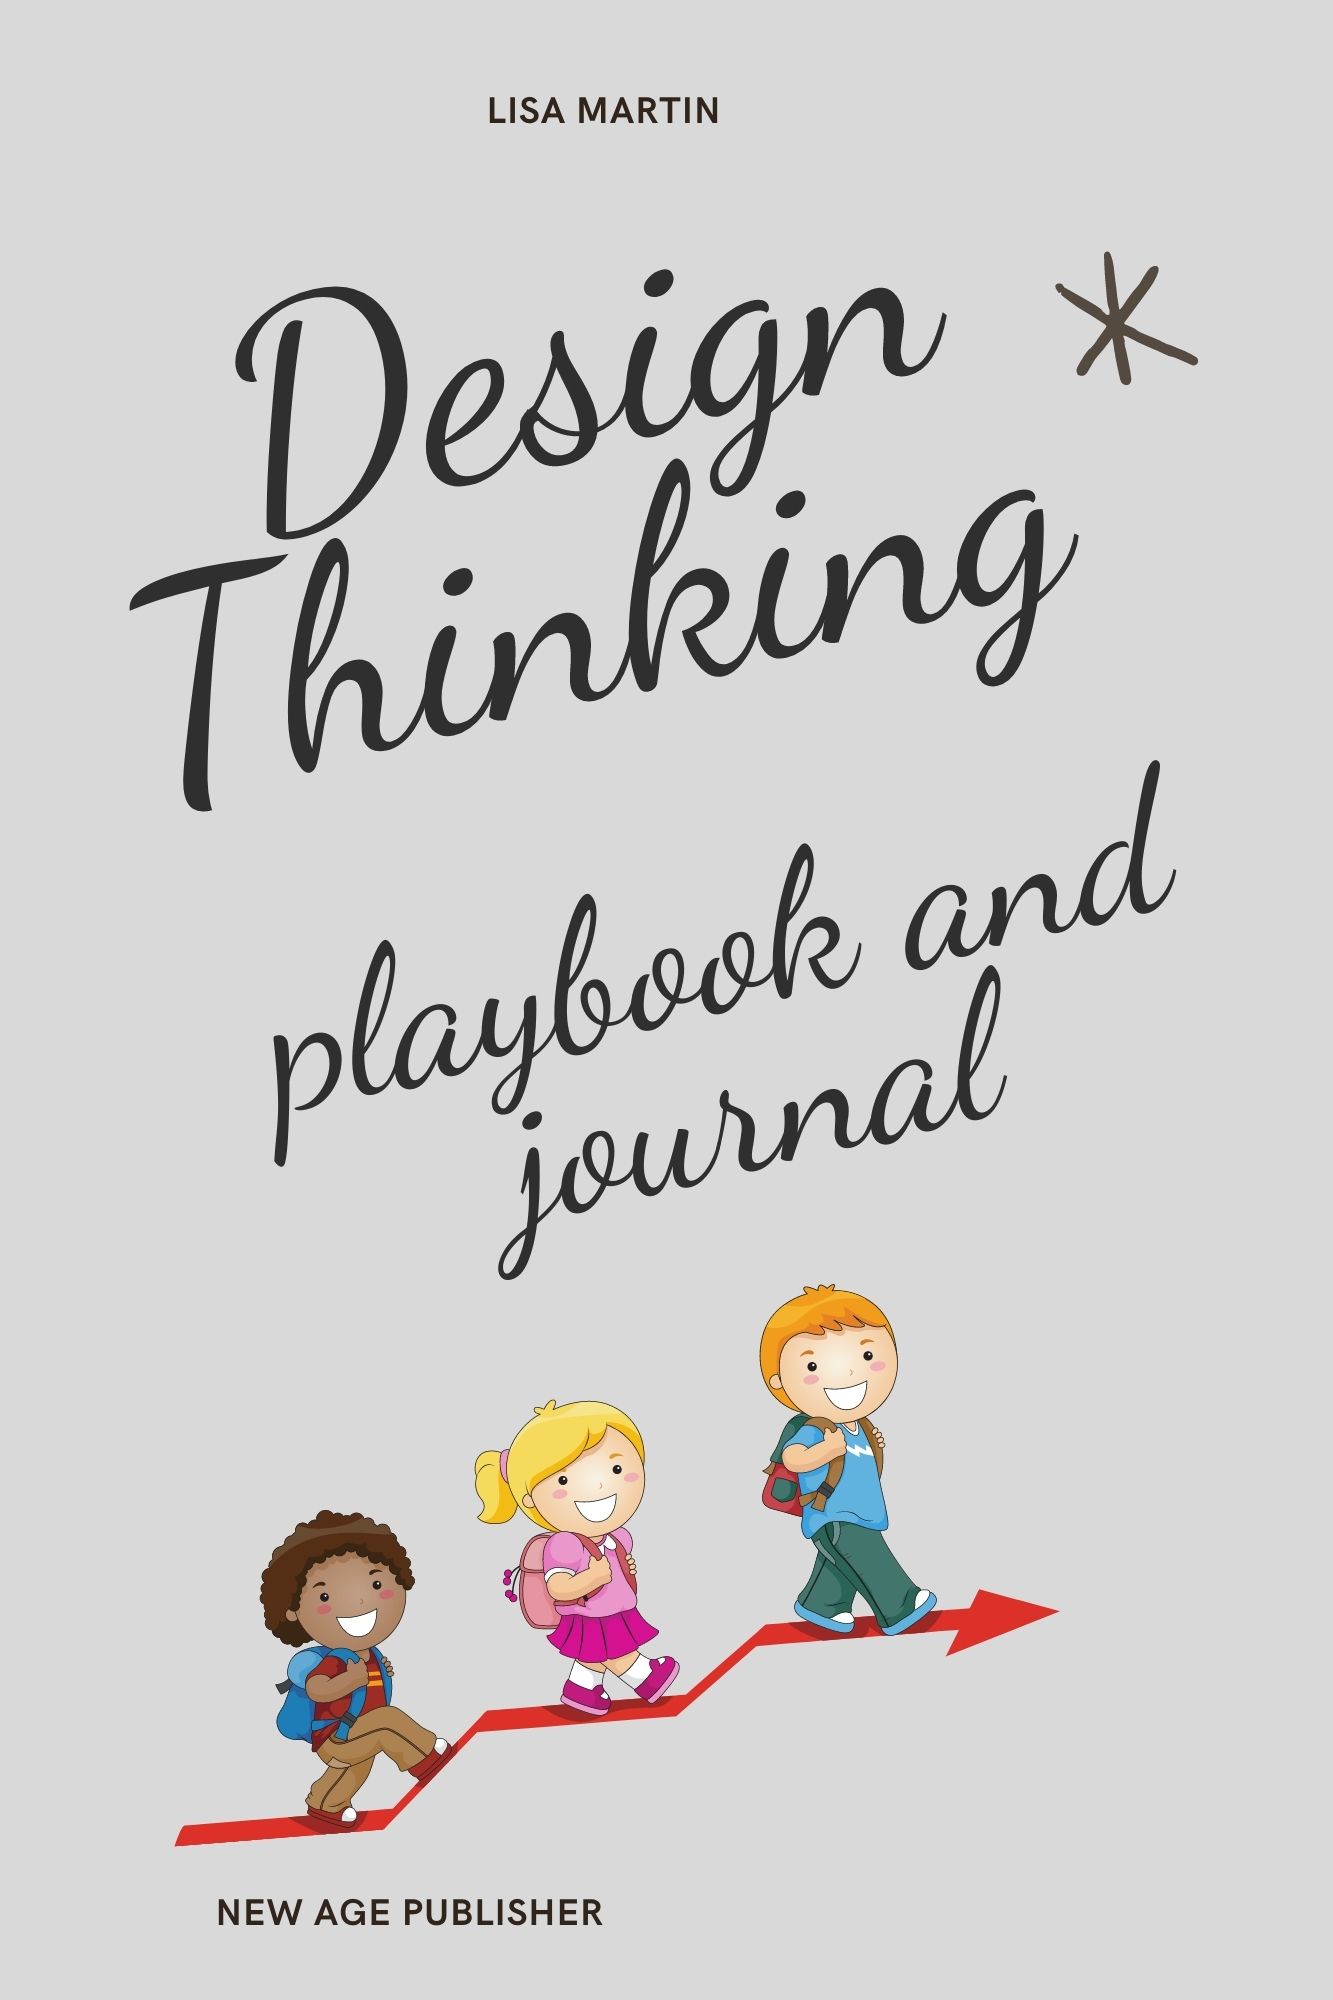 FREE: Design Thinking playbook and journal for kids ages 6-12 years by Lisa Martin